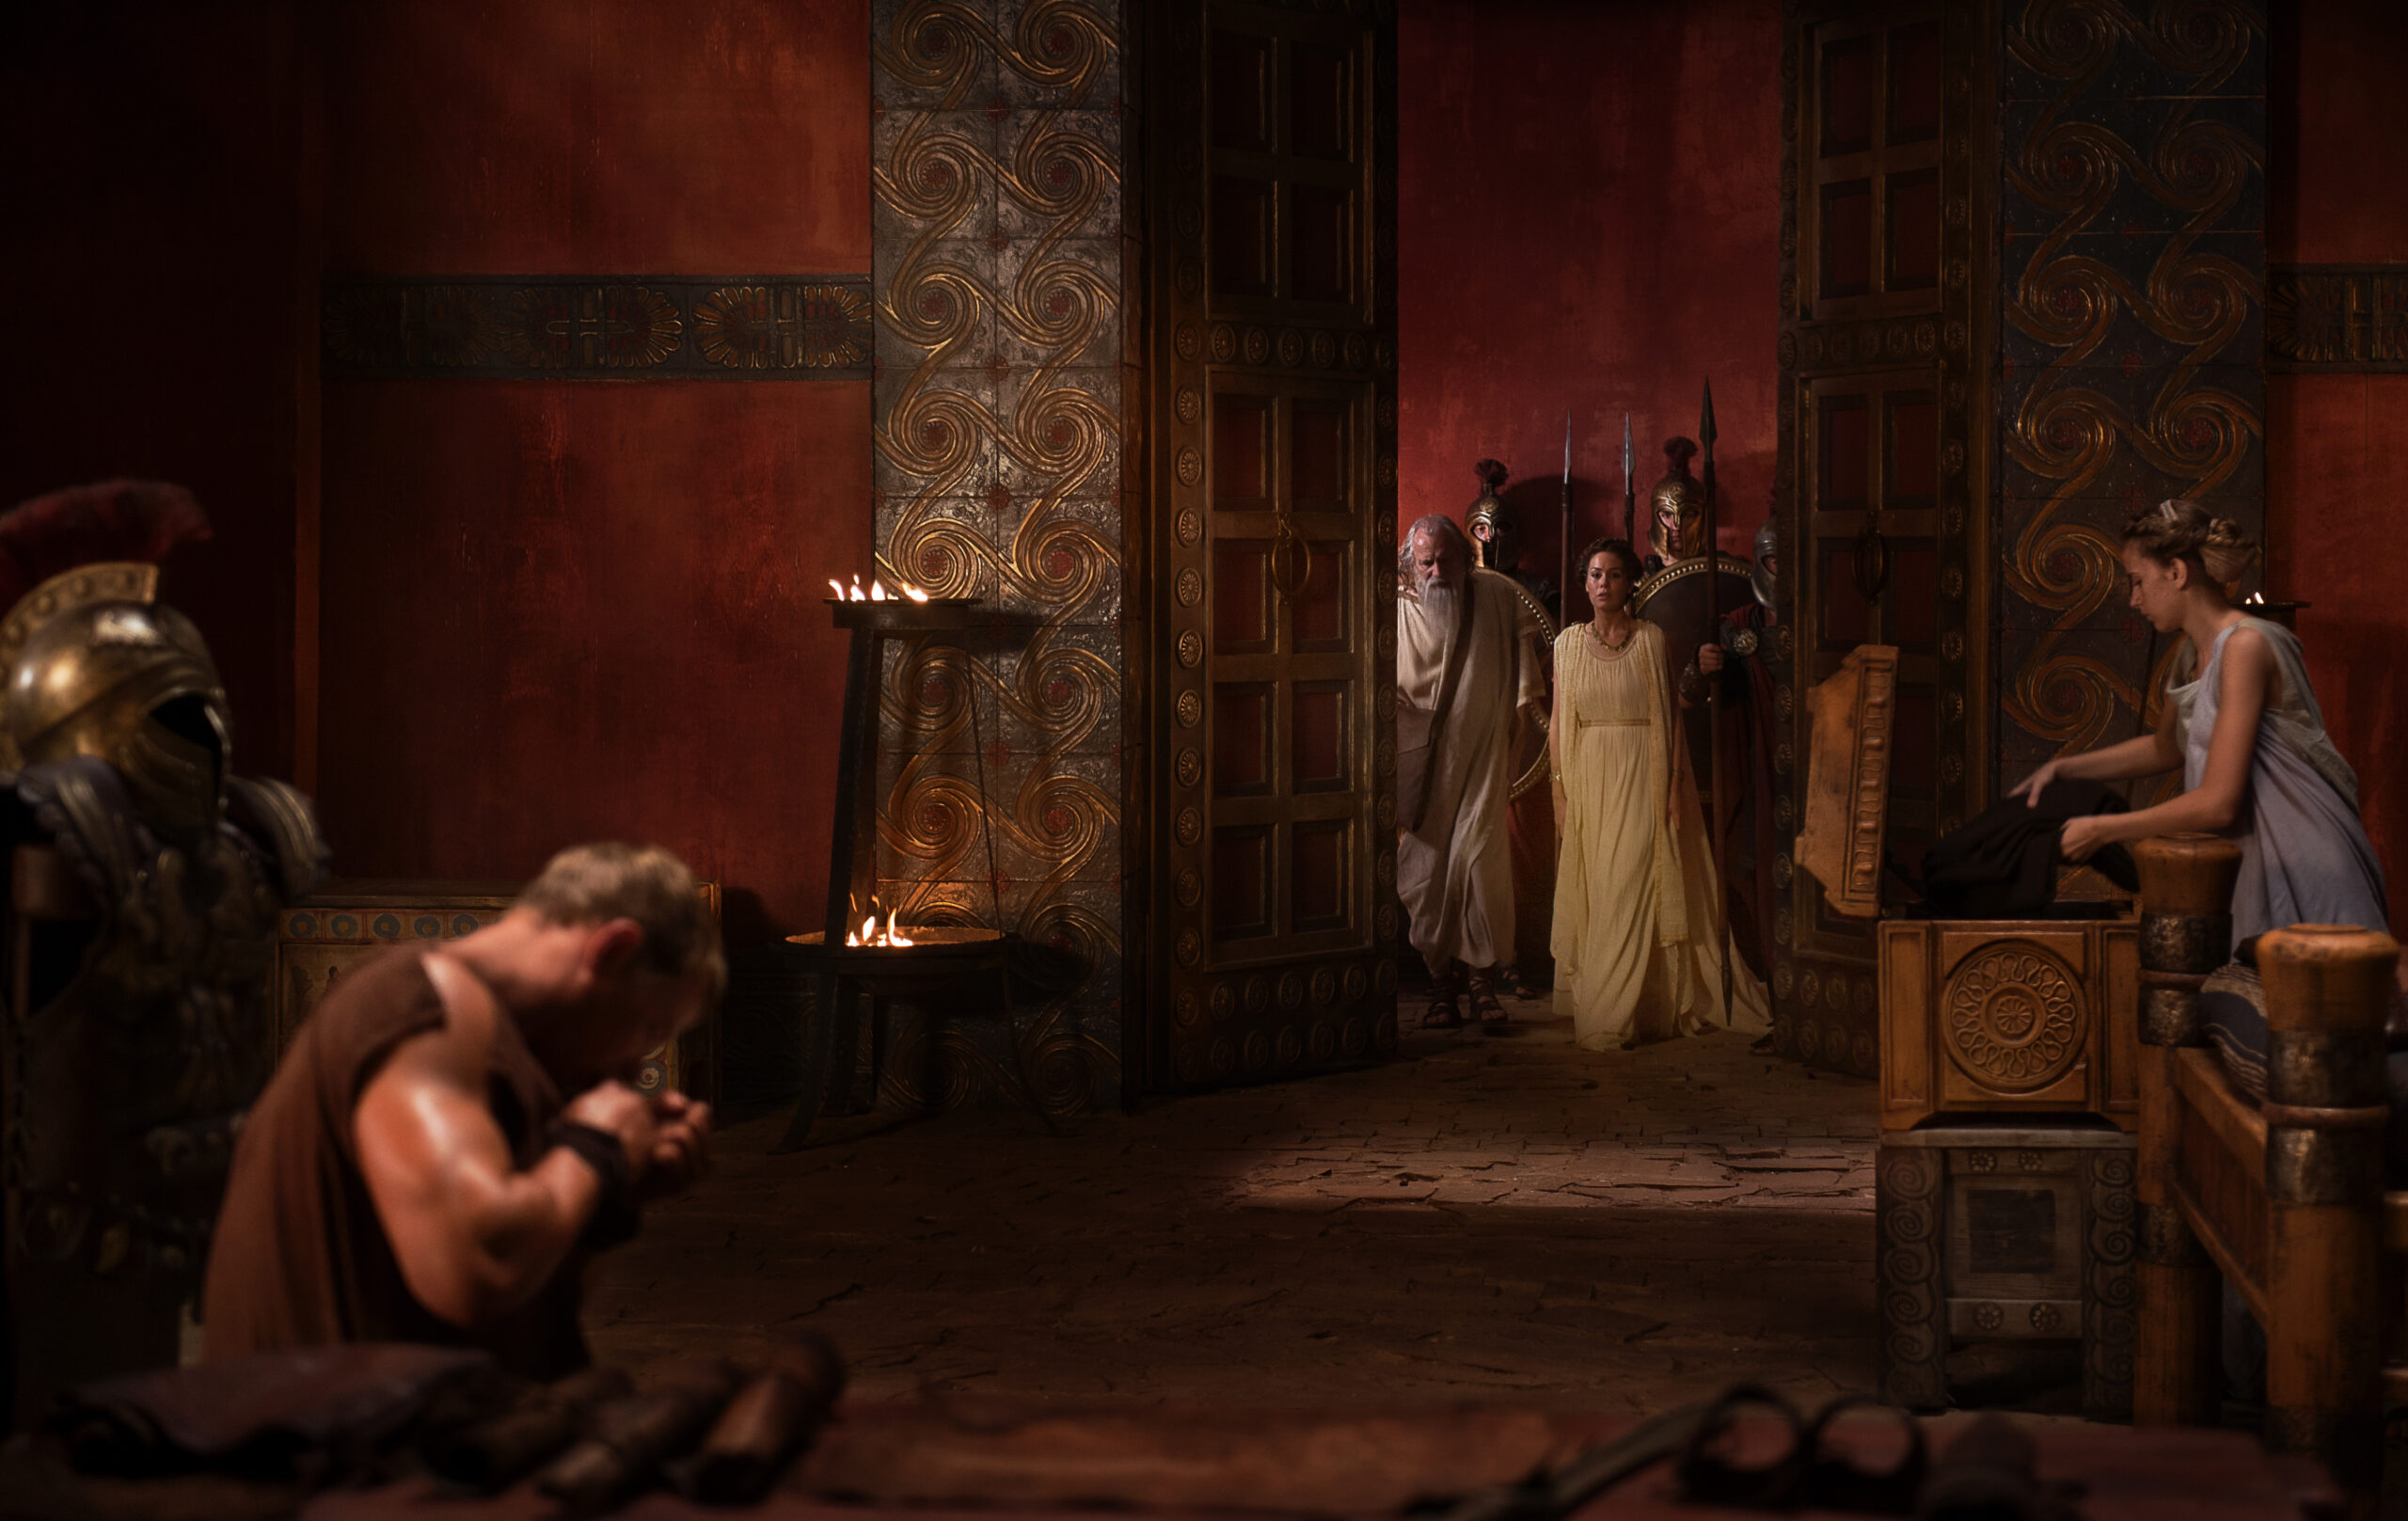 THE LEGEND OF HERCULES - Directed by Renny Harlin - Production Design by Luca Tranchino - Int. Bedroom - ©2014 - Millennium Films